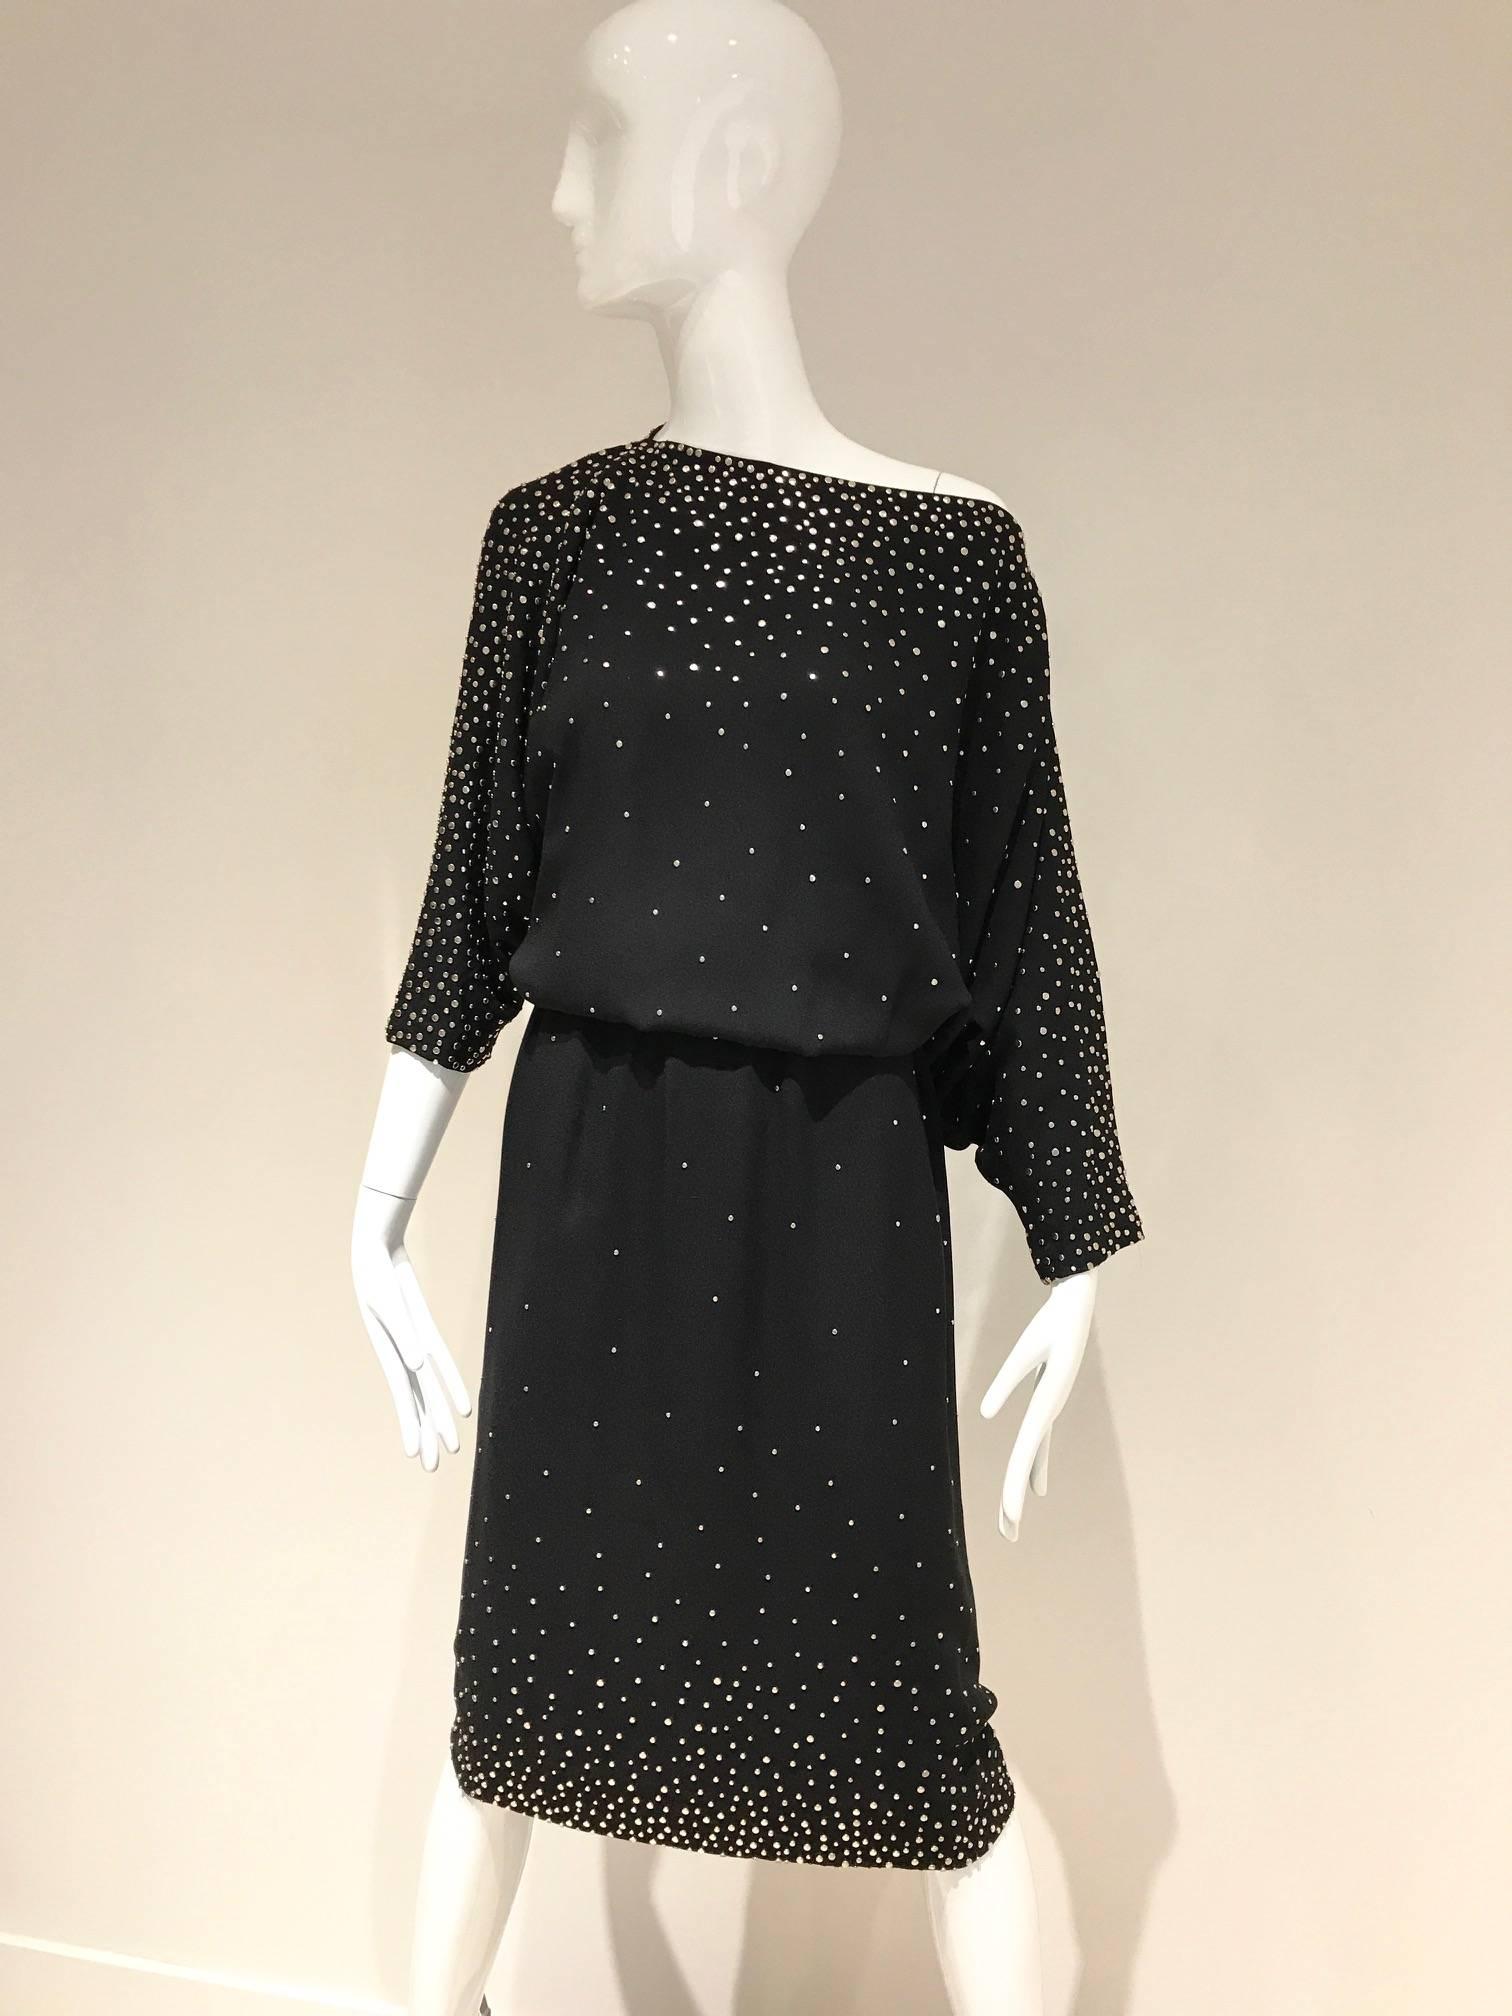 Vintage Halston crepe dress with silver grommets  and batwing sleeve.
Fit size 4/6/8  Medium
**** This Garment has been professionally Dry Cleaned and Ready to wear.

